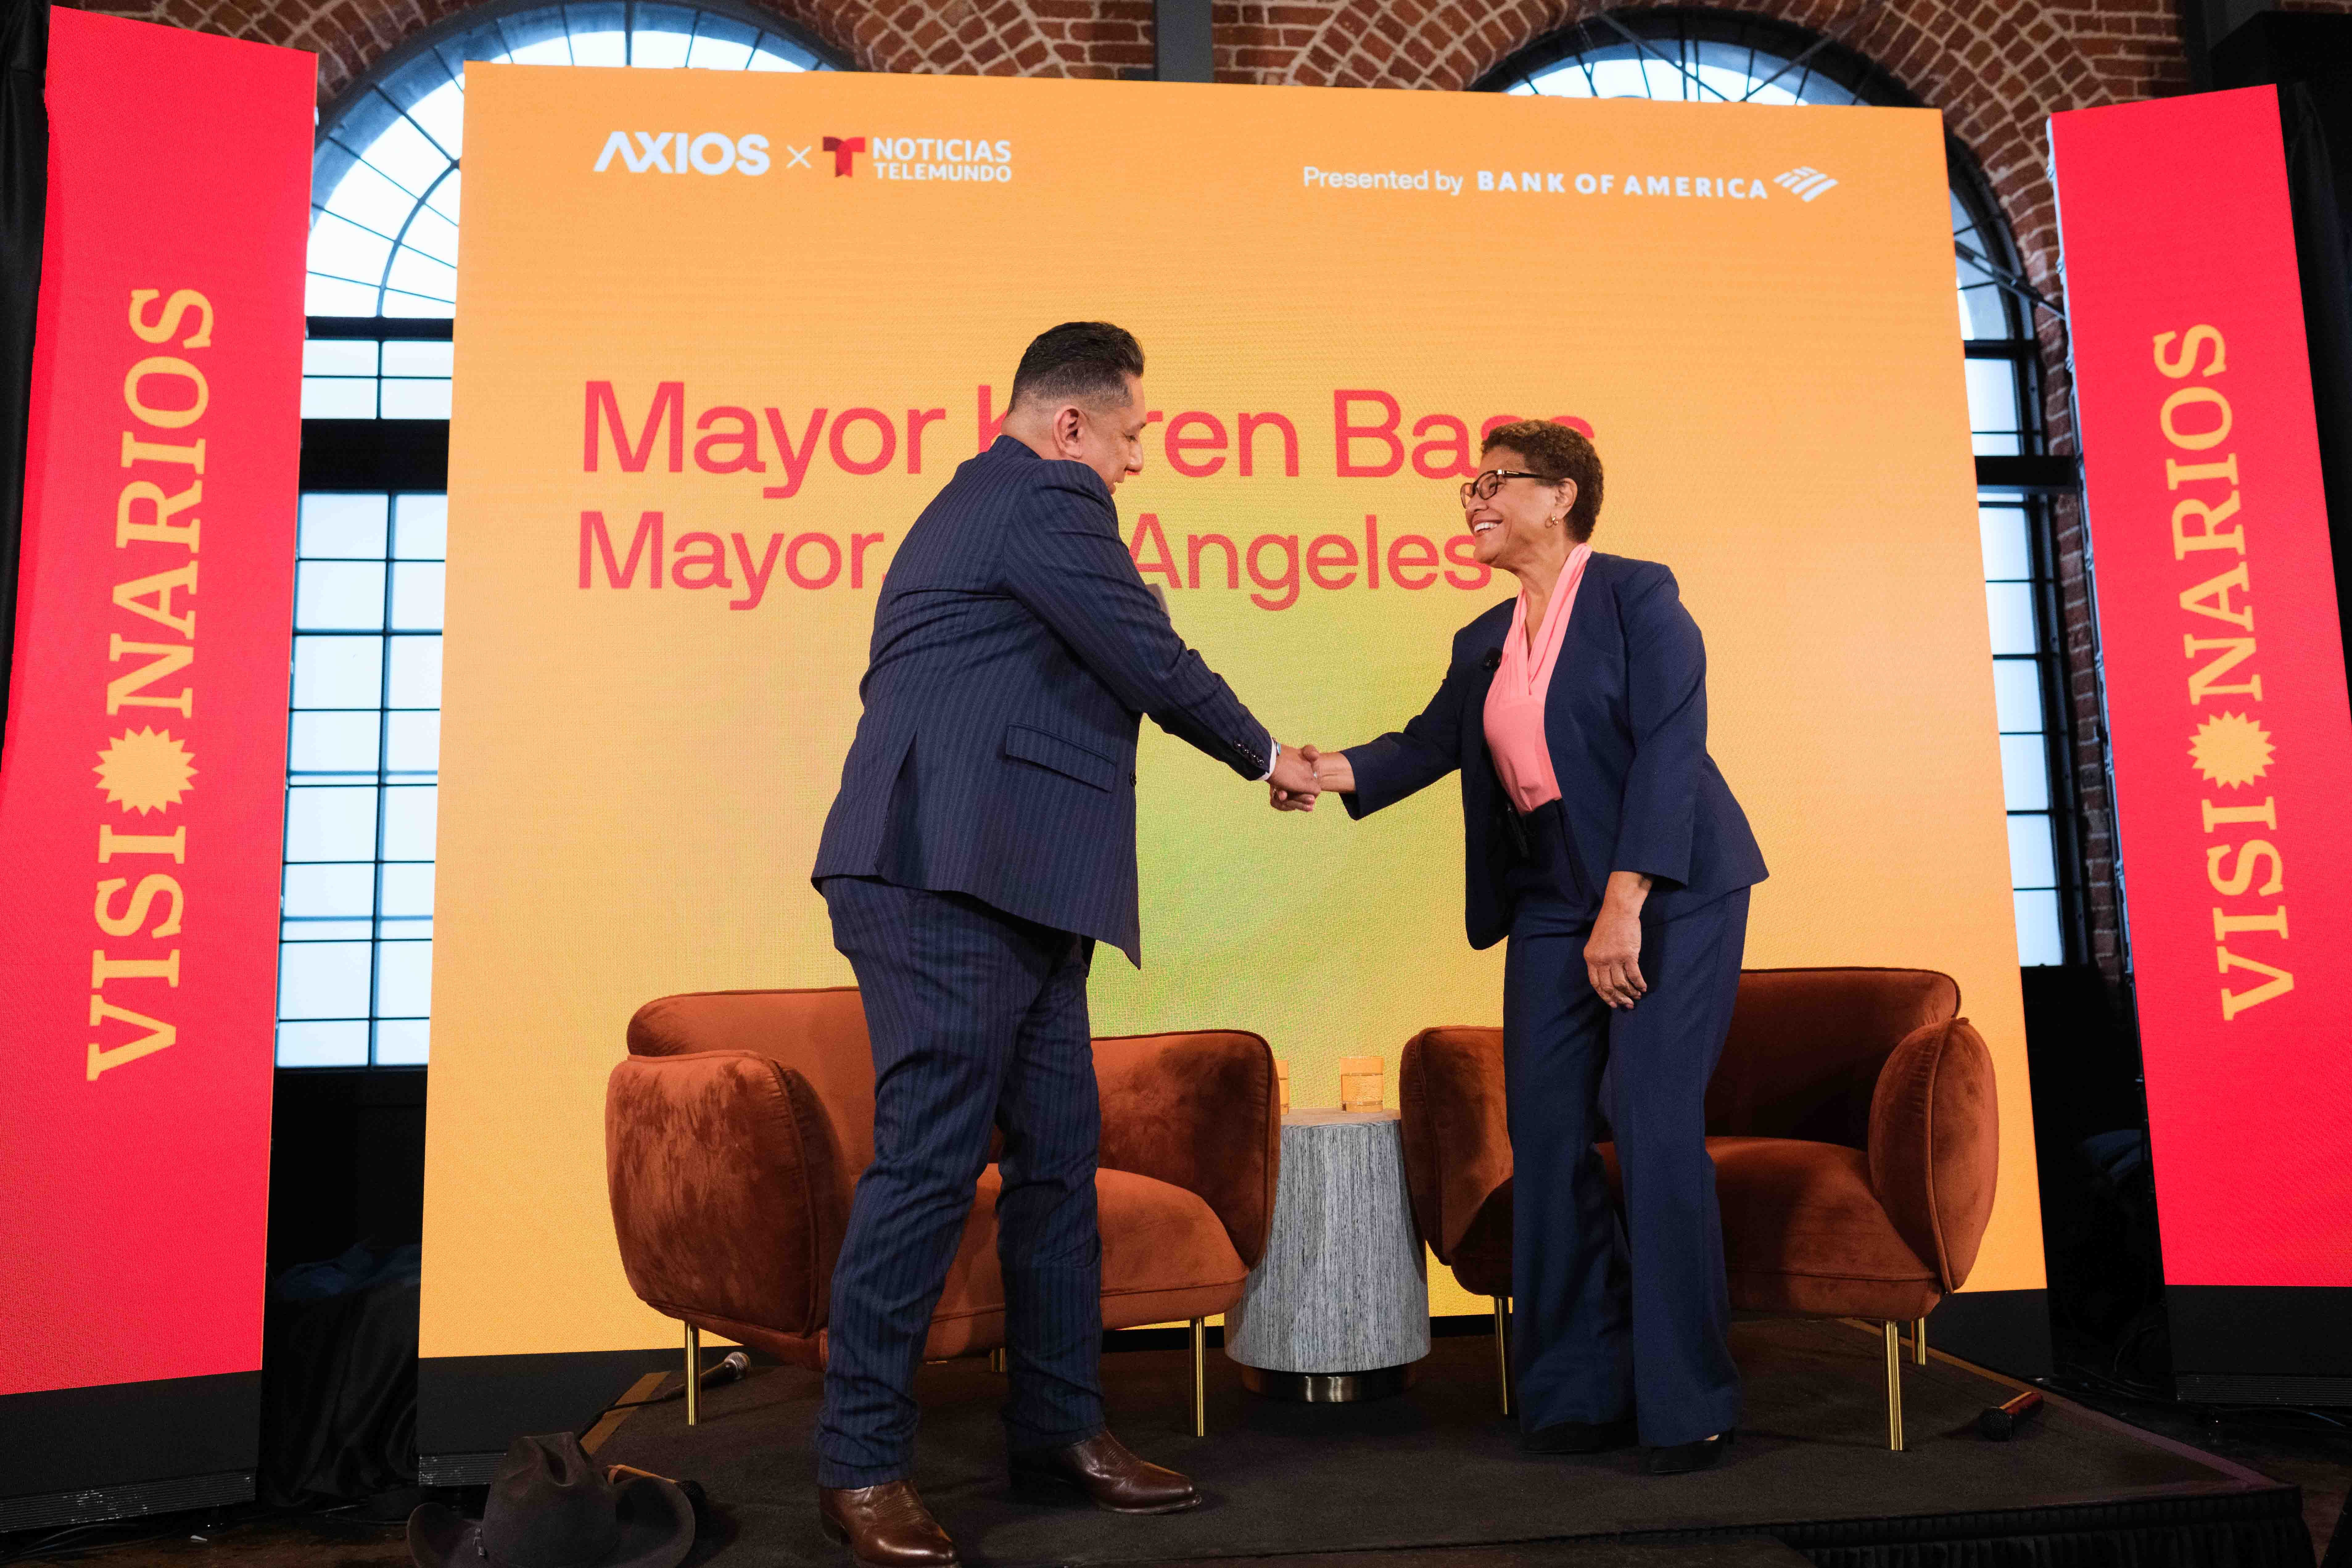 Axios' Russell Contreras shakes hands with LA Mayor Karen Bass on the Visionarios stage.